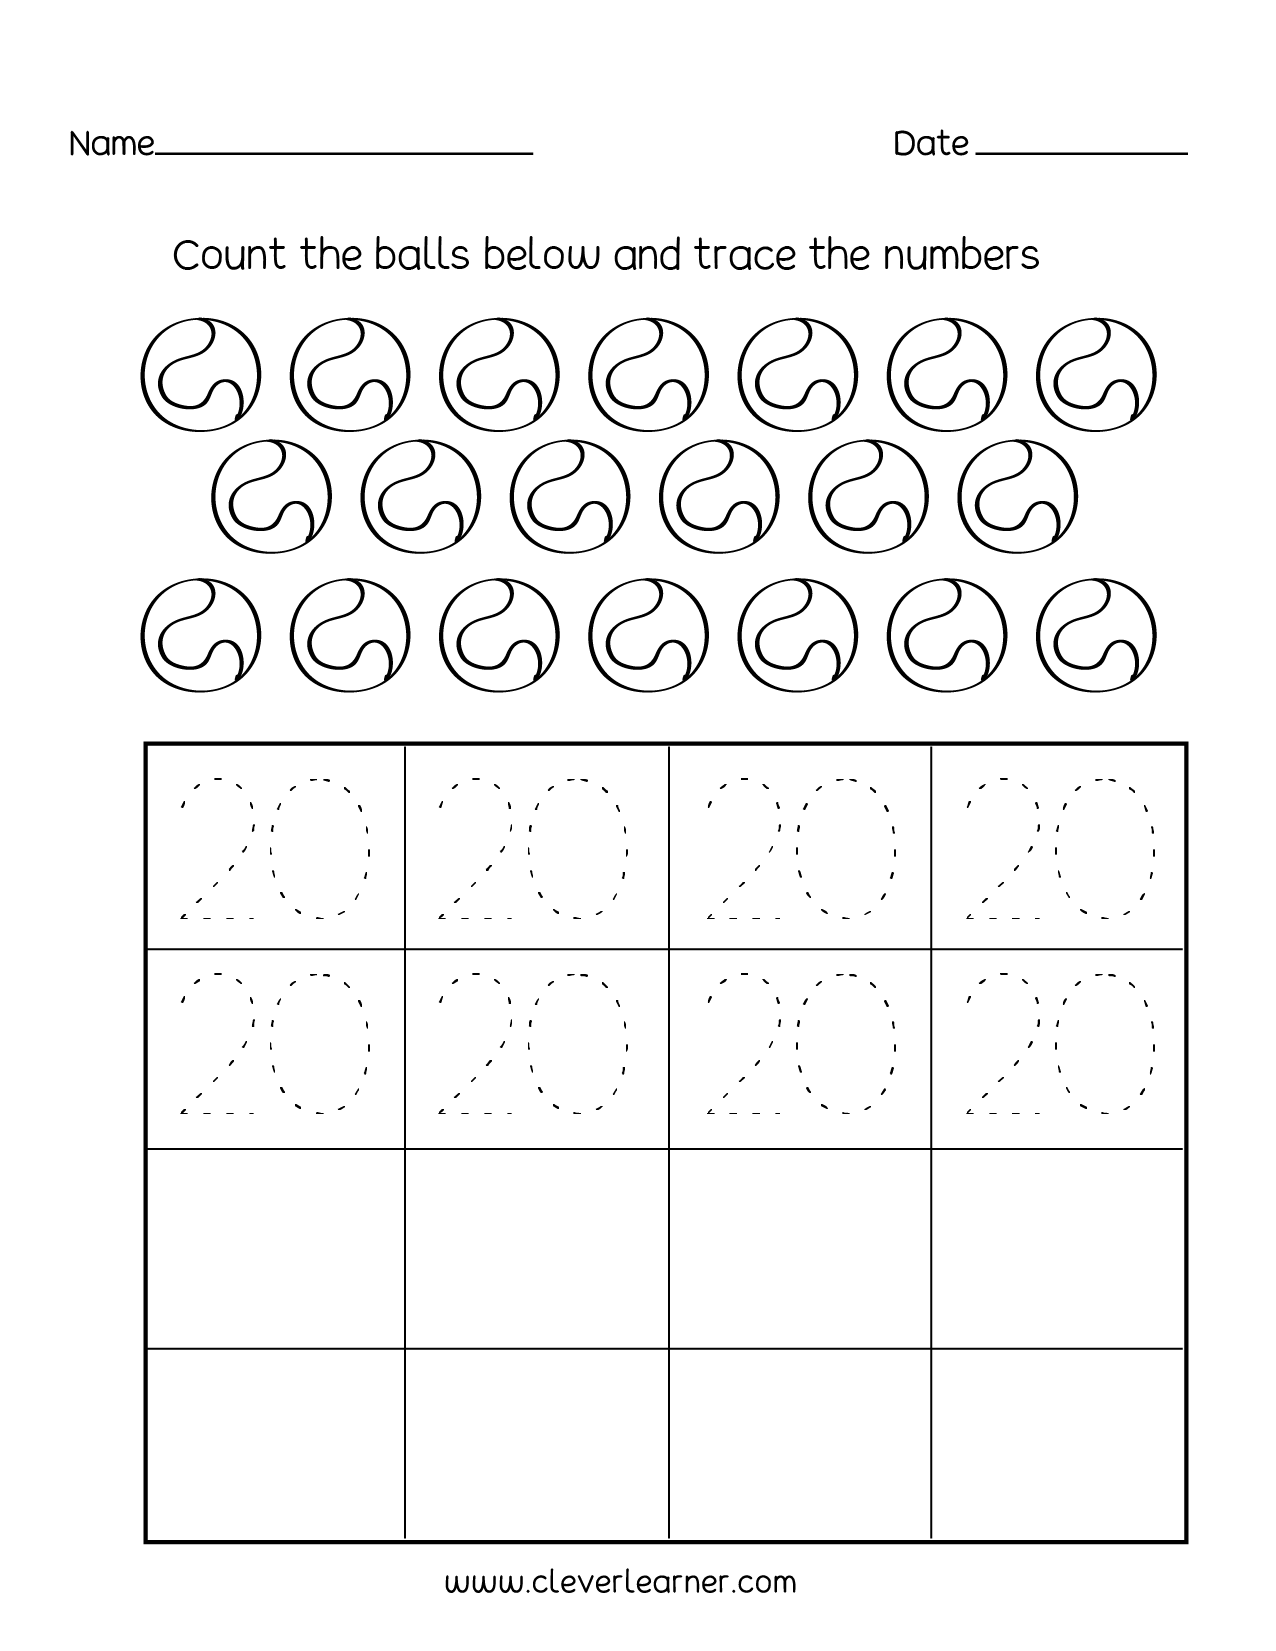 free-number-writing-practice-1-20-worksheets-1-10-writing-numbers-worksheets-for-preschool-and